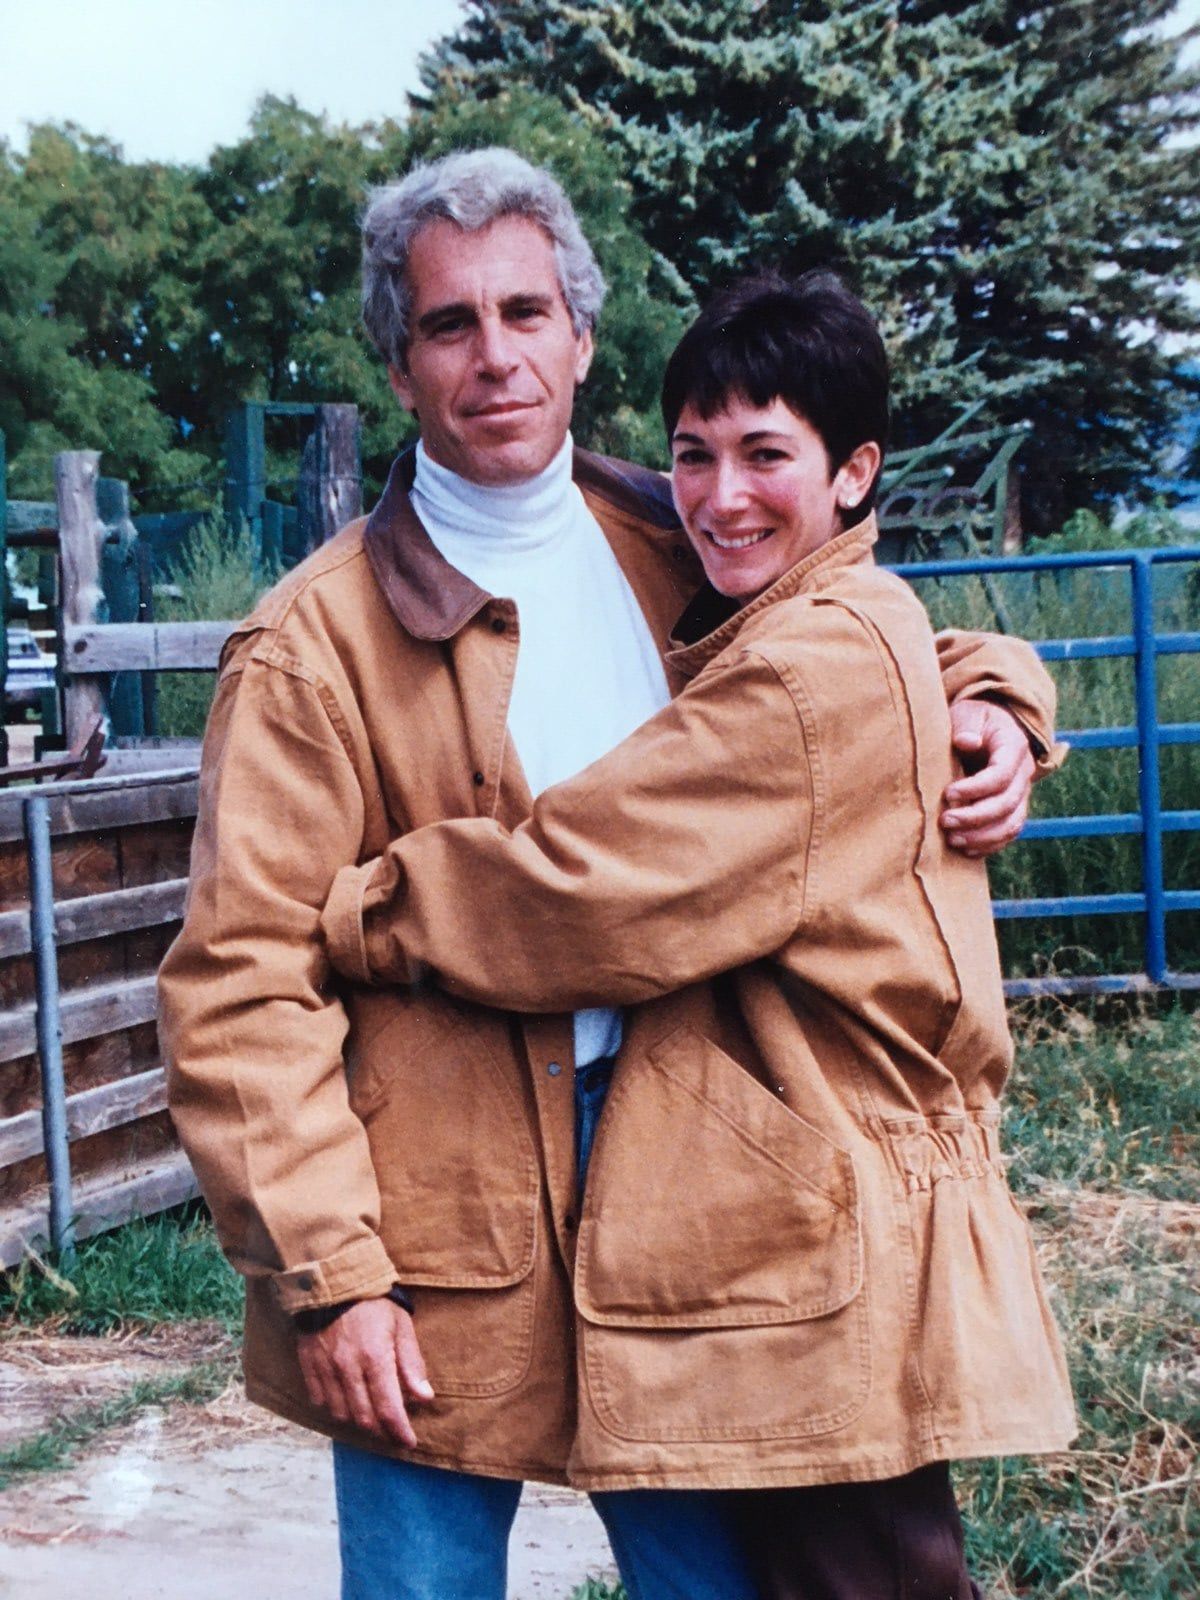 Jeffery Epstein and Ghislaine Maxwell in the 90s